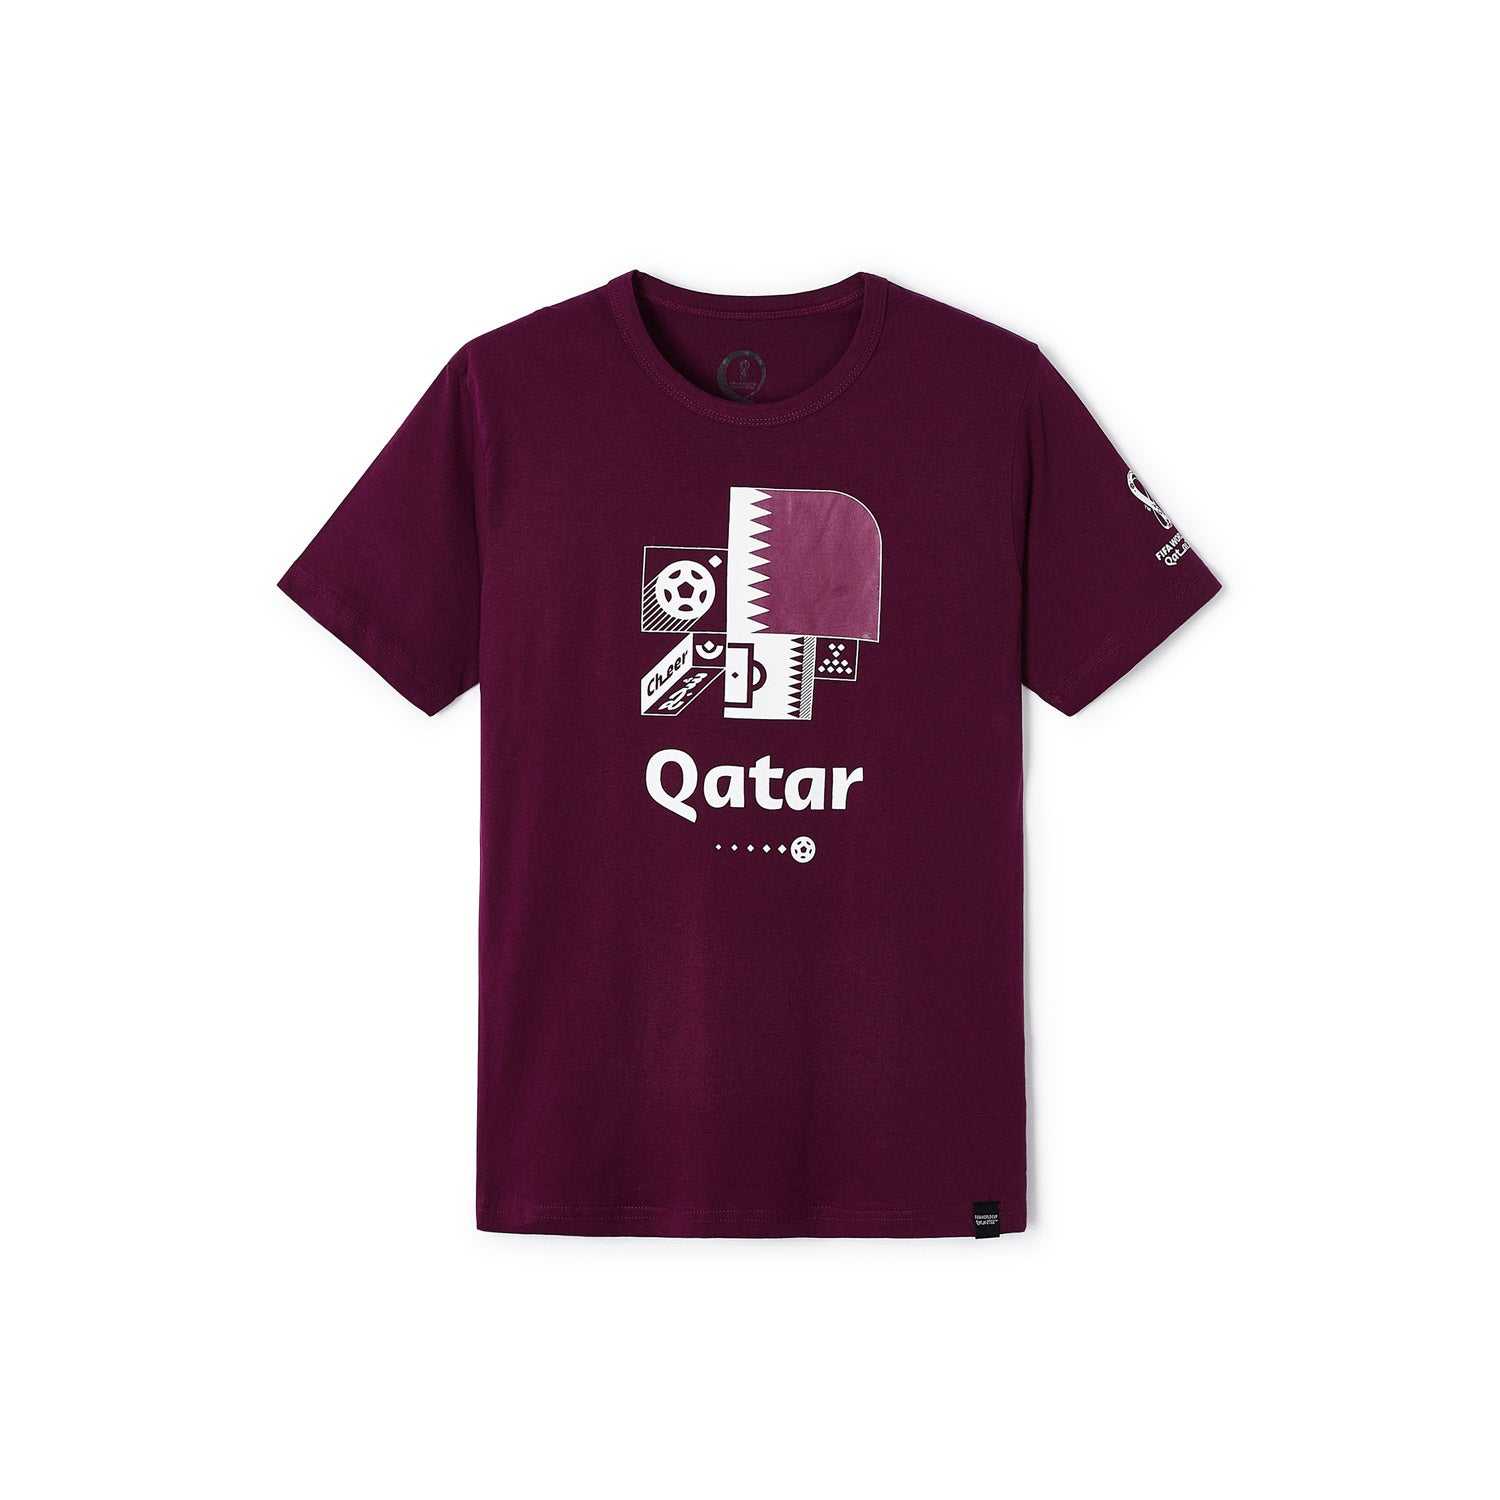 2022 World Cup Qatar Red T-Shirt - Youth